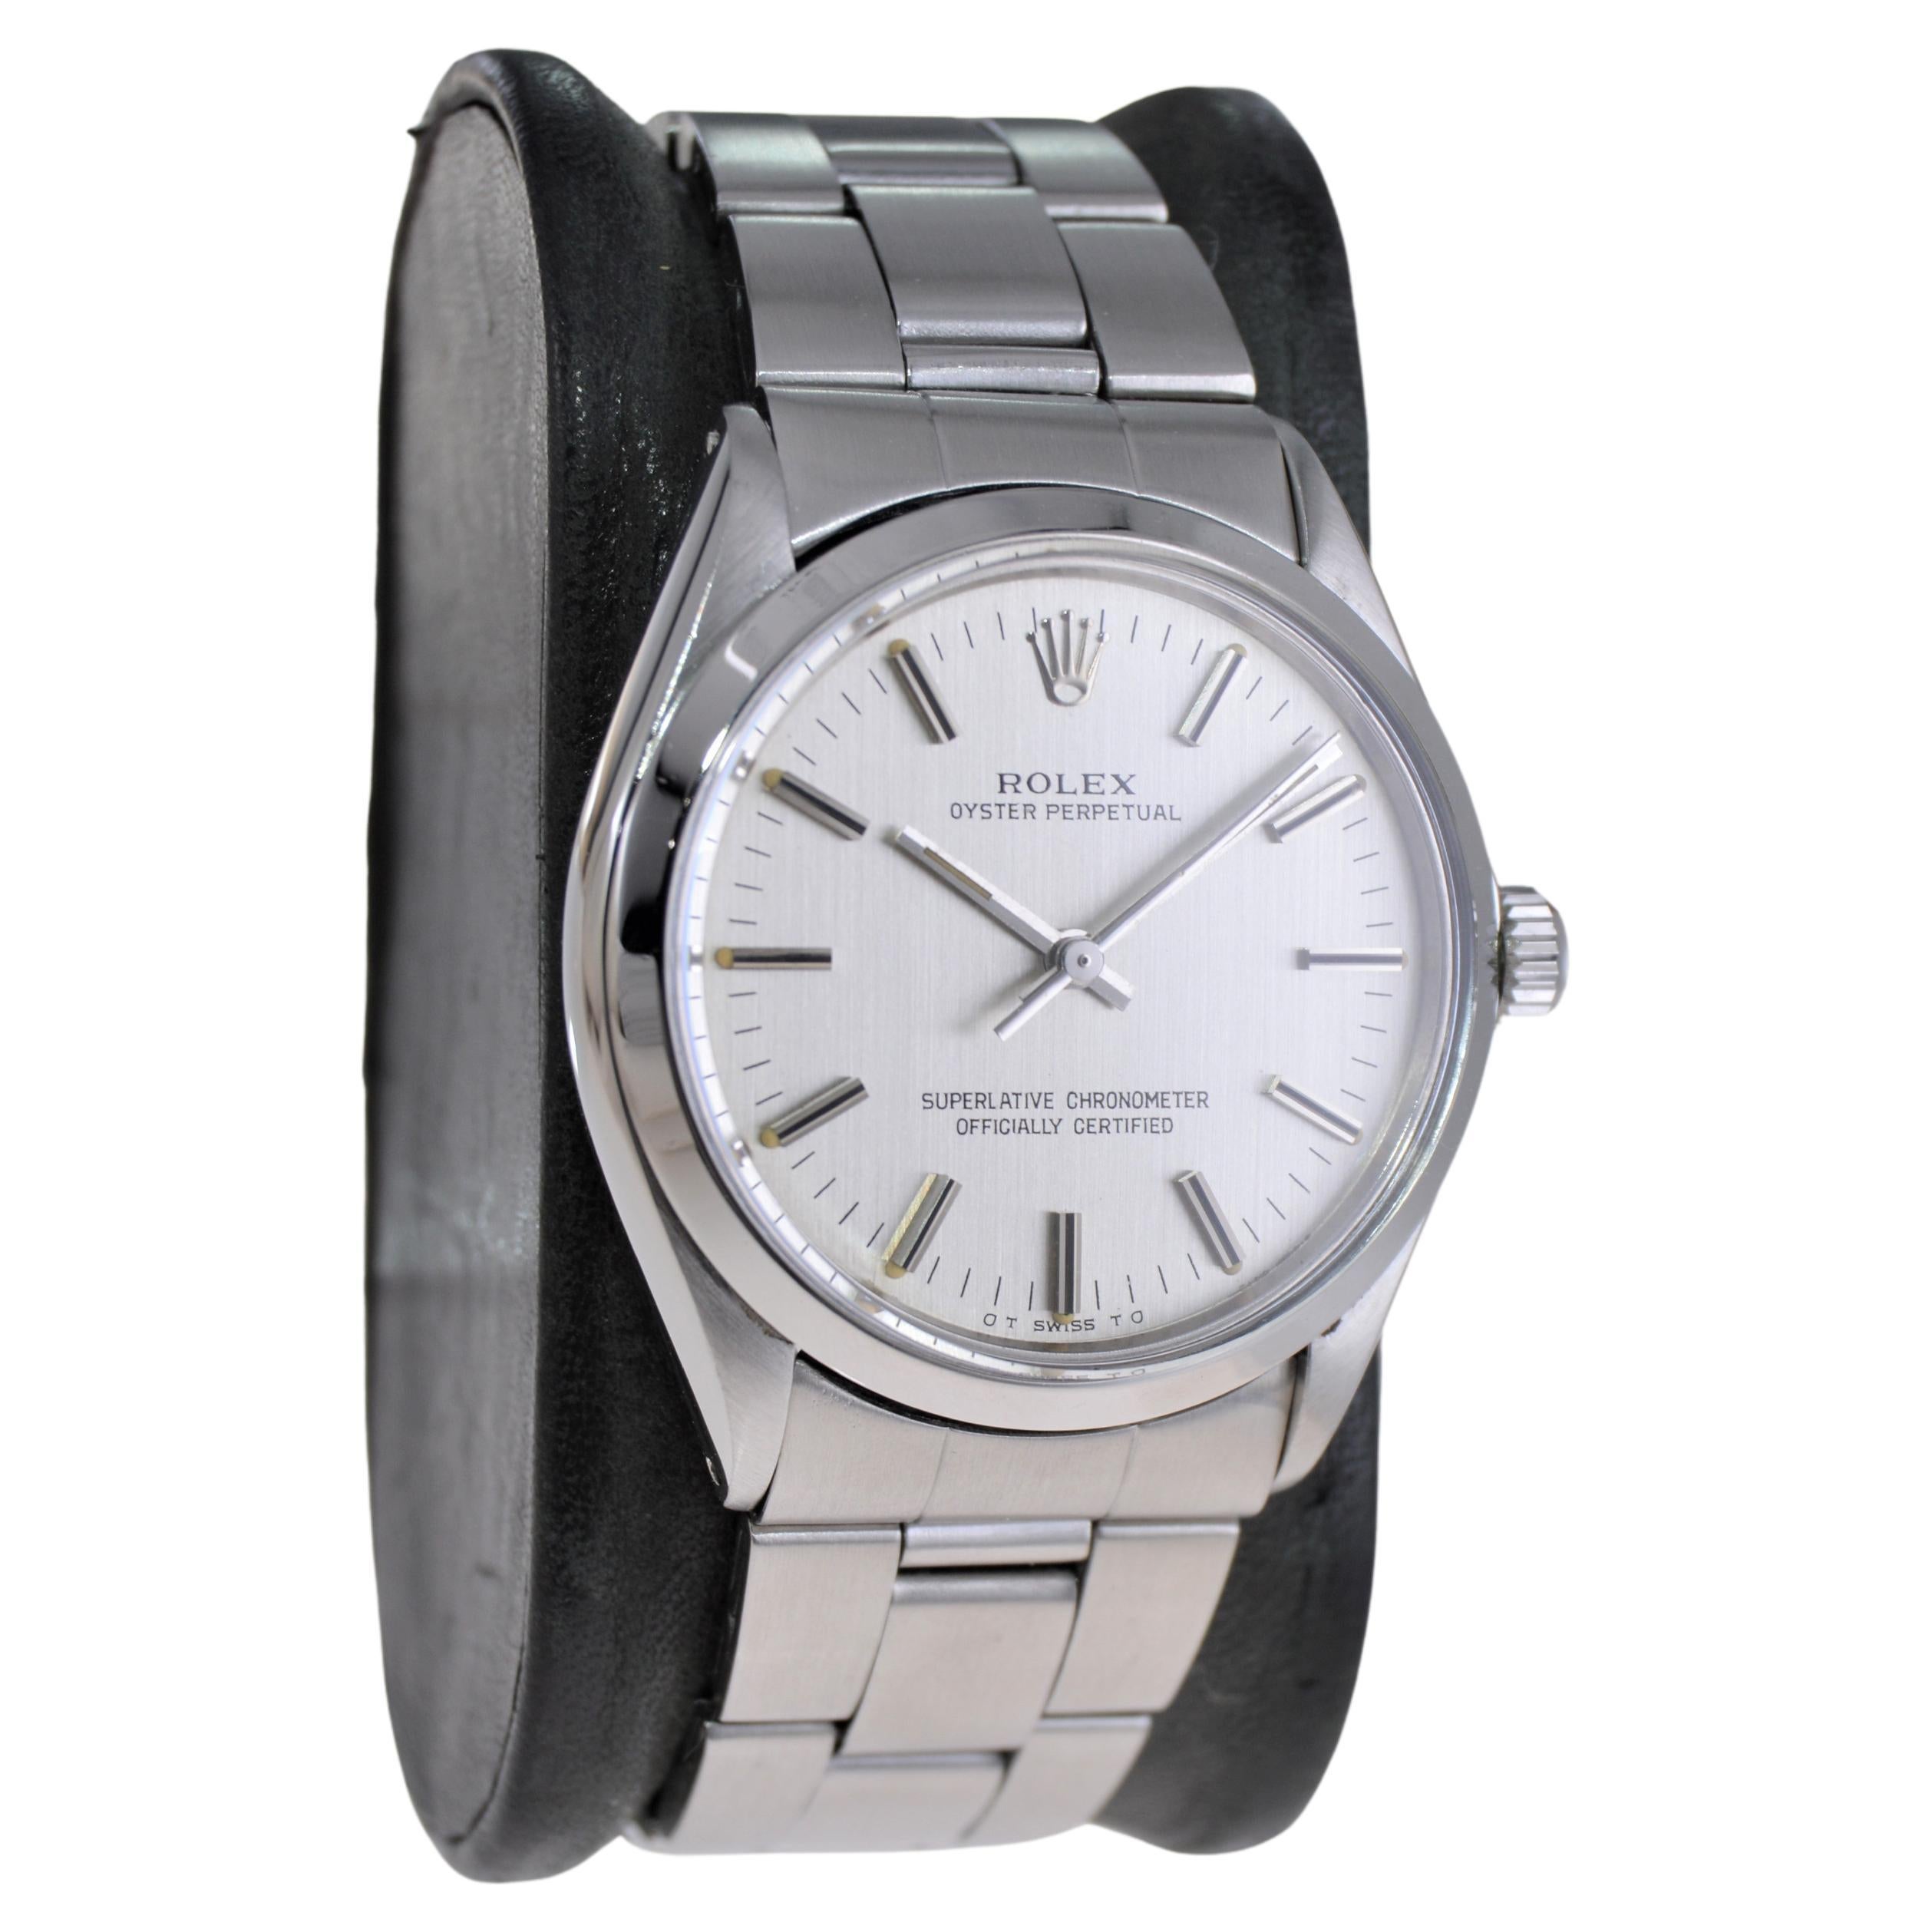 FACTORY / HOUSE: Rolex Watch Company
STYLE / REFERENCE: Oyster Perpetual Date / Reference 1002
METAL / MATERIAL: Stainless Steel
CIRCA / YEAR: 1970's
DIMENSIONS / SIZE: 39mm Length X 34mm Diameter
MOVEMENT / CALIBER: Perpetual Winding / 26 Jewels /